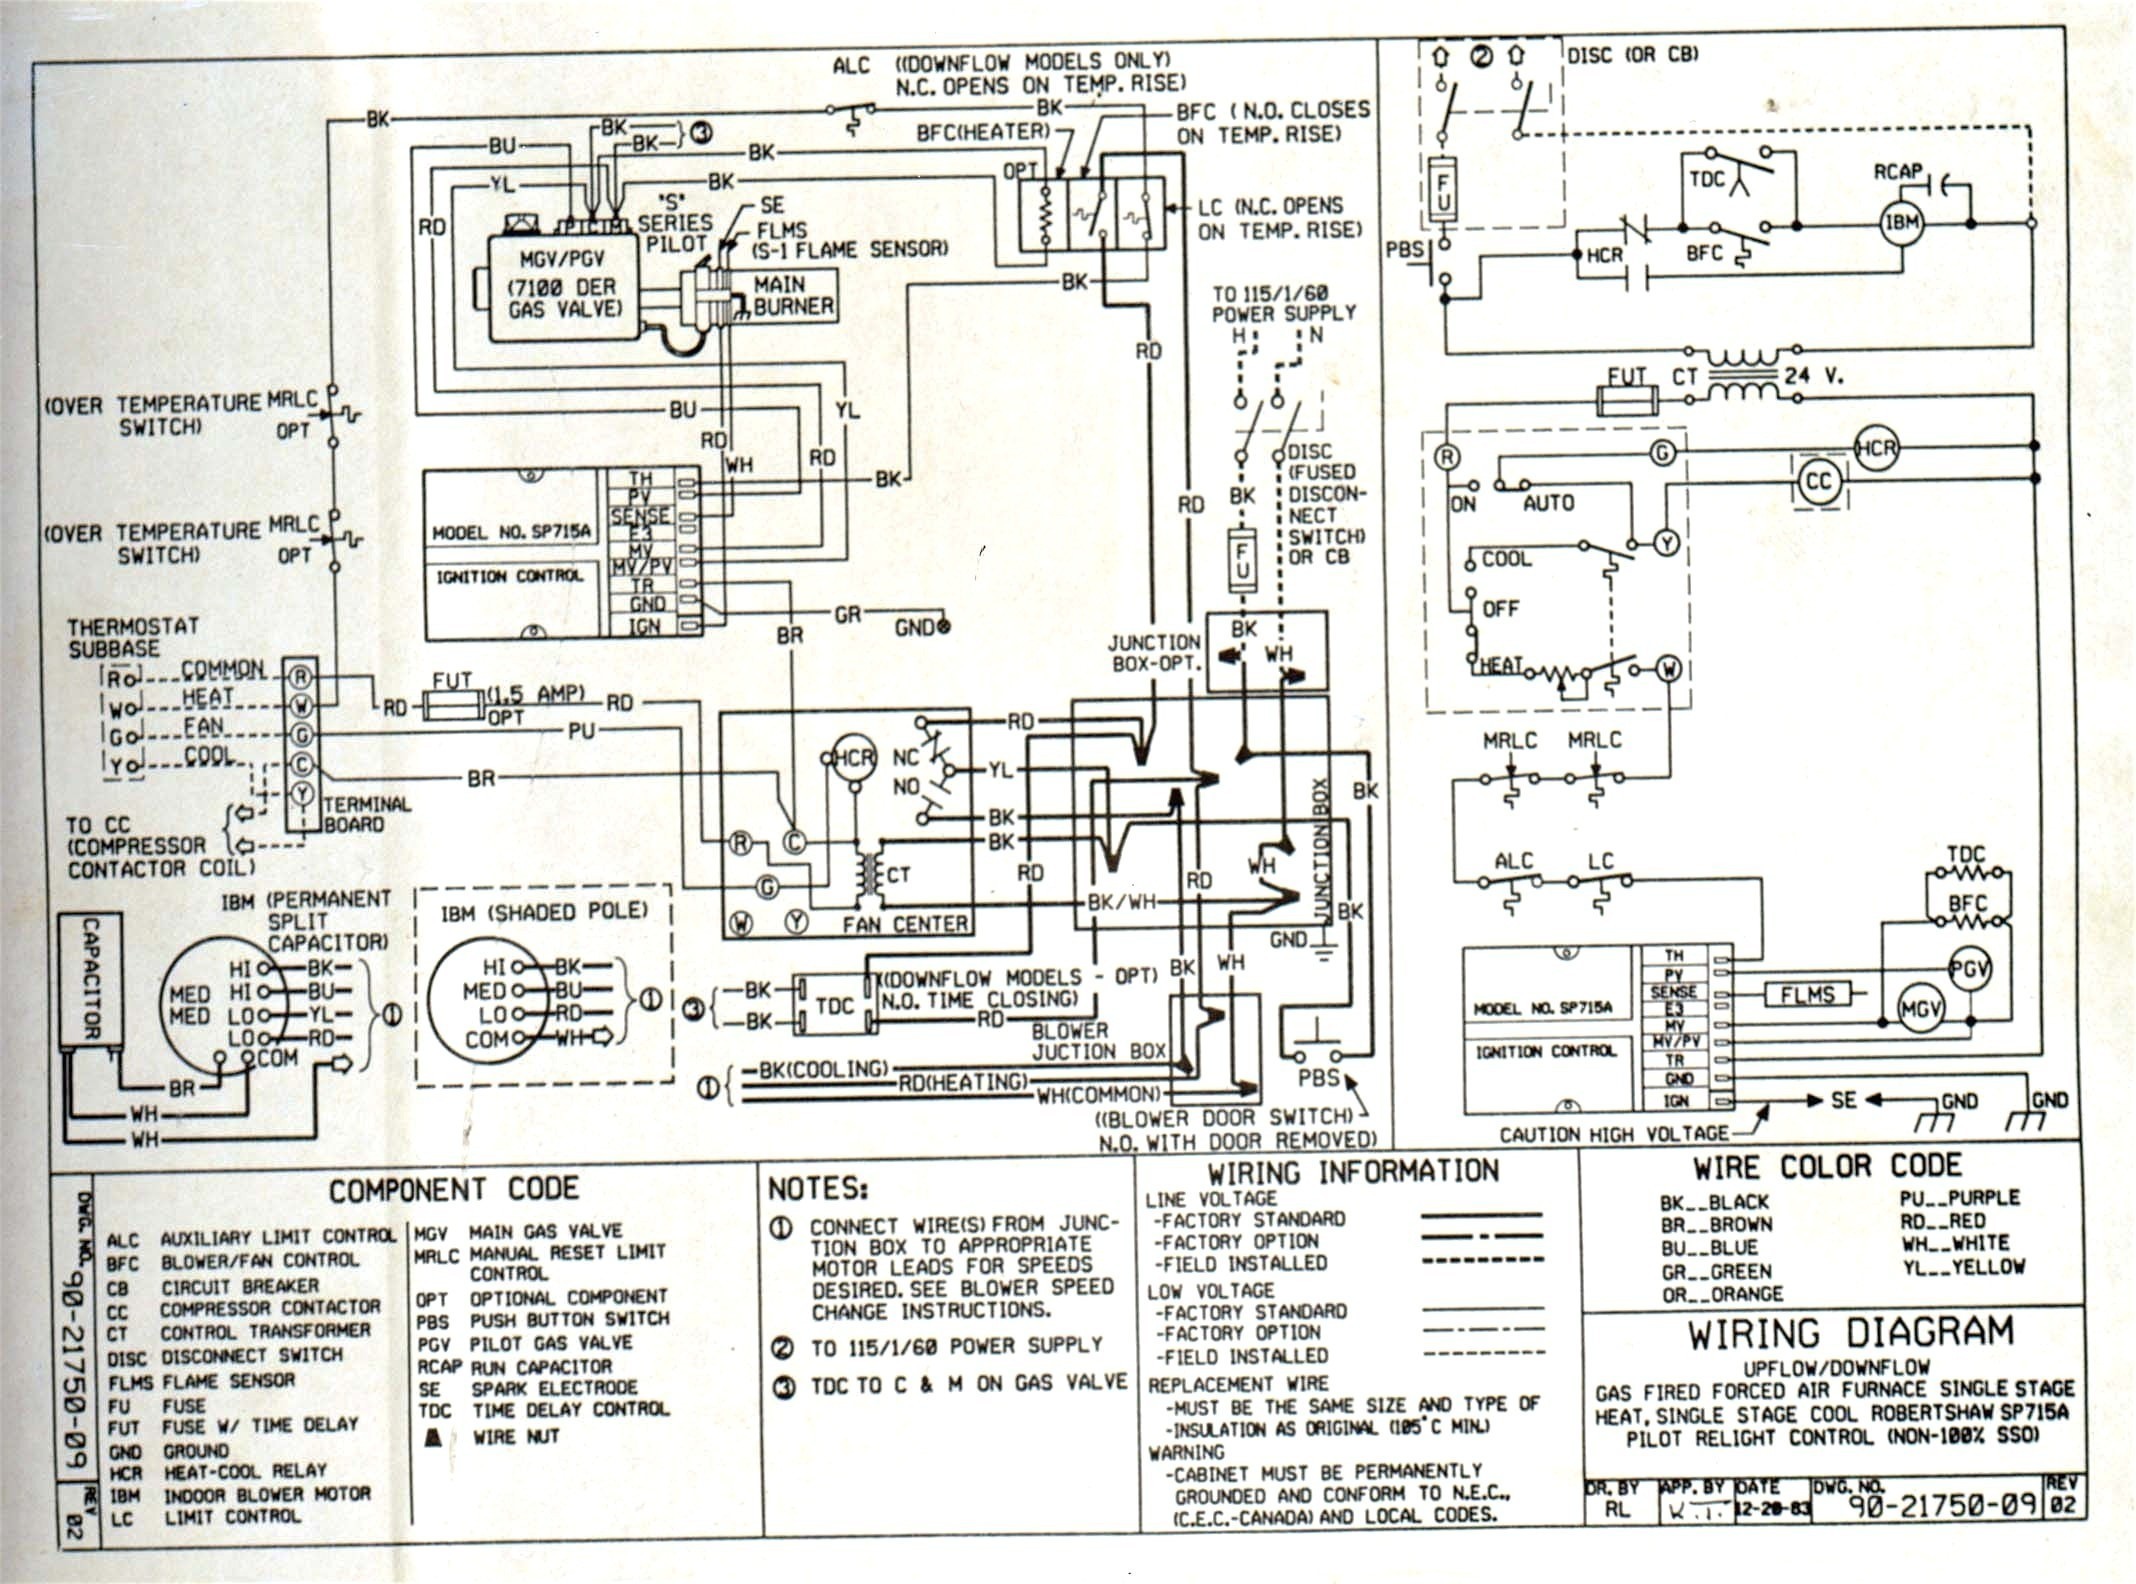 Electrical Wiring Diagrams for Cars New Wiring Diagram Car Ac Of Electrical Wiring Diagrams for Cars